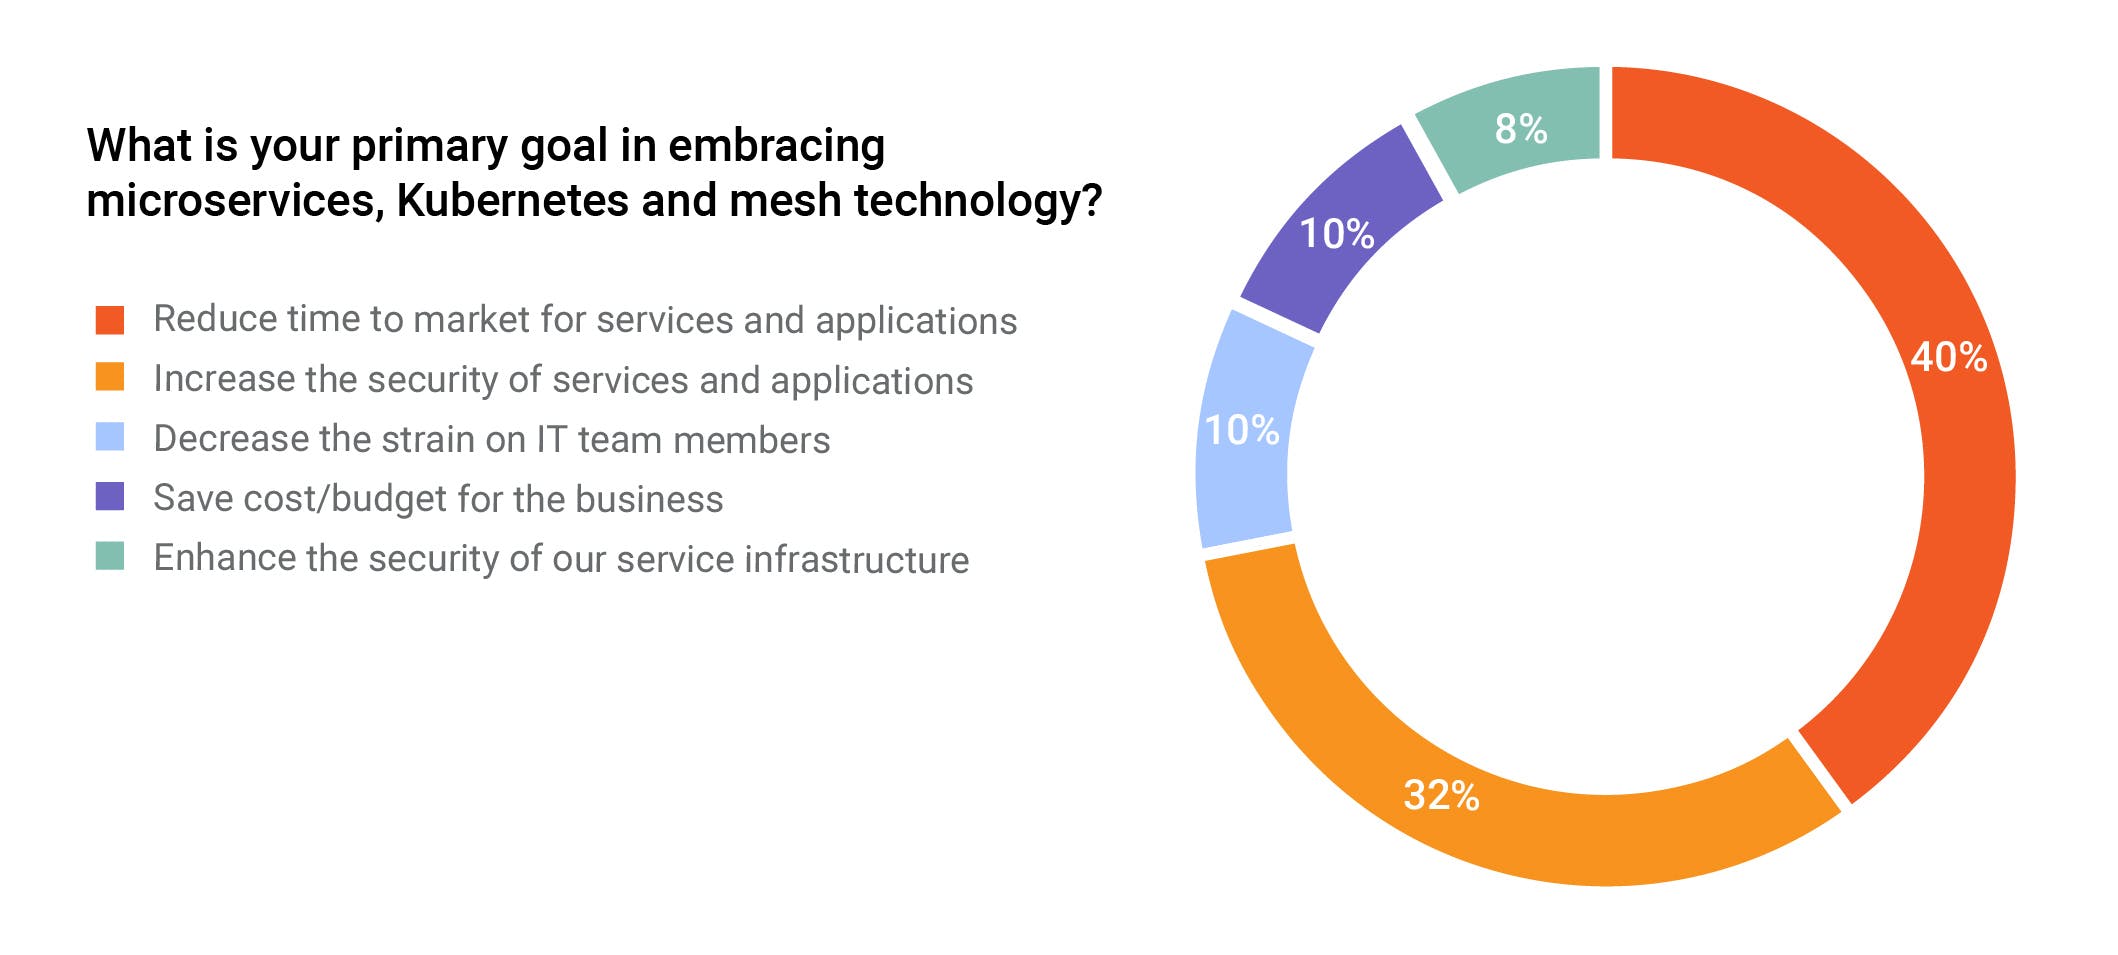 Primary goal for microservices, Kubernetes and service mesh